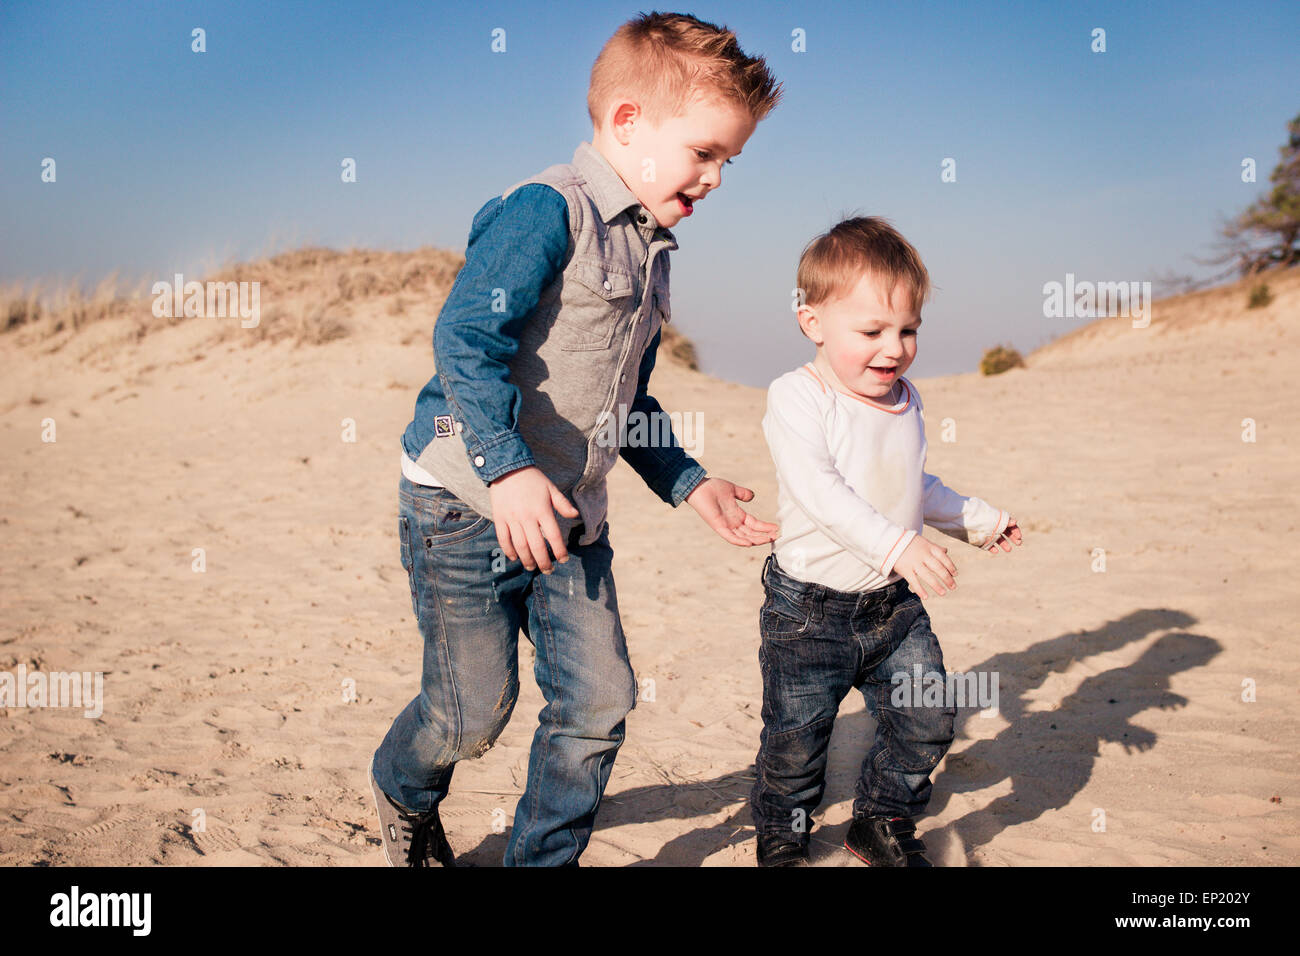 Two boys playing on the beach Stock Photo